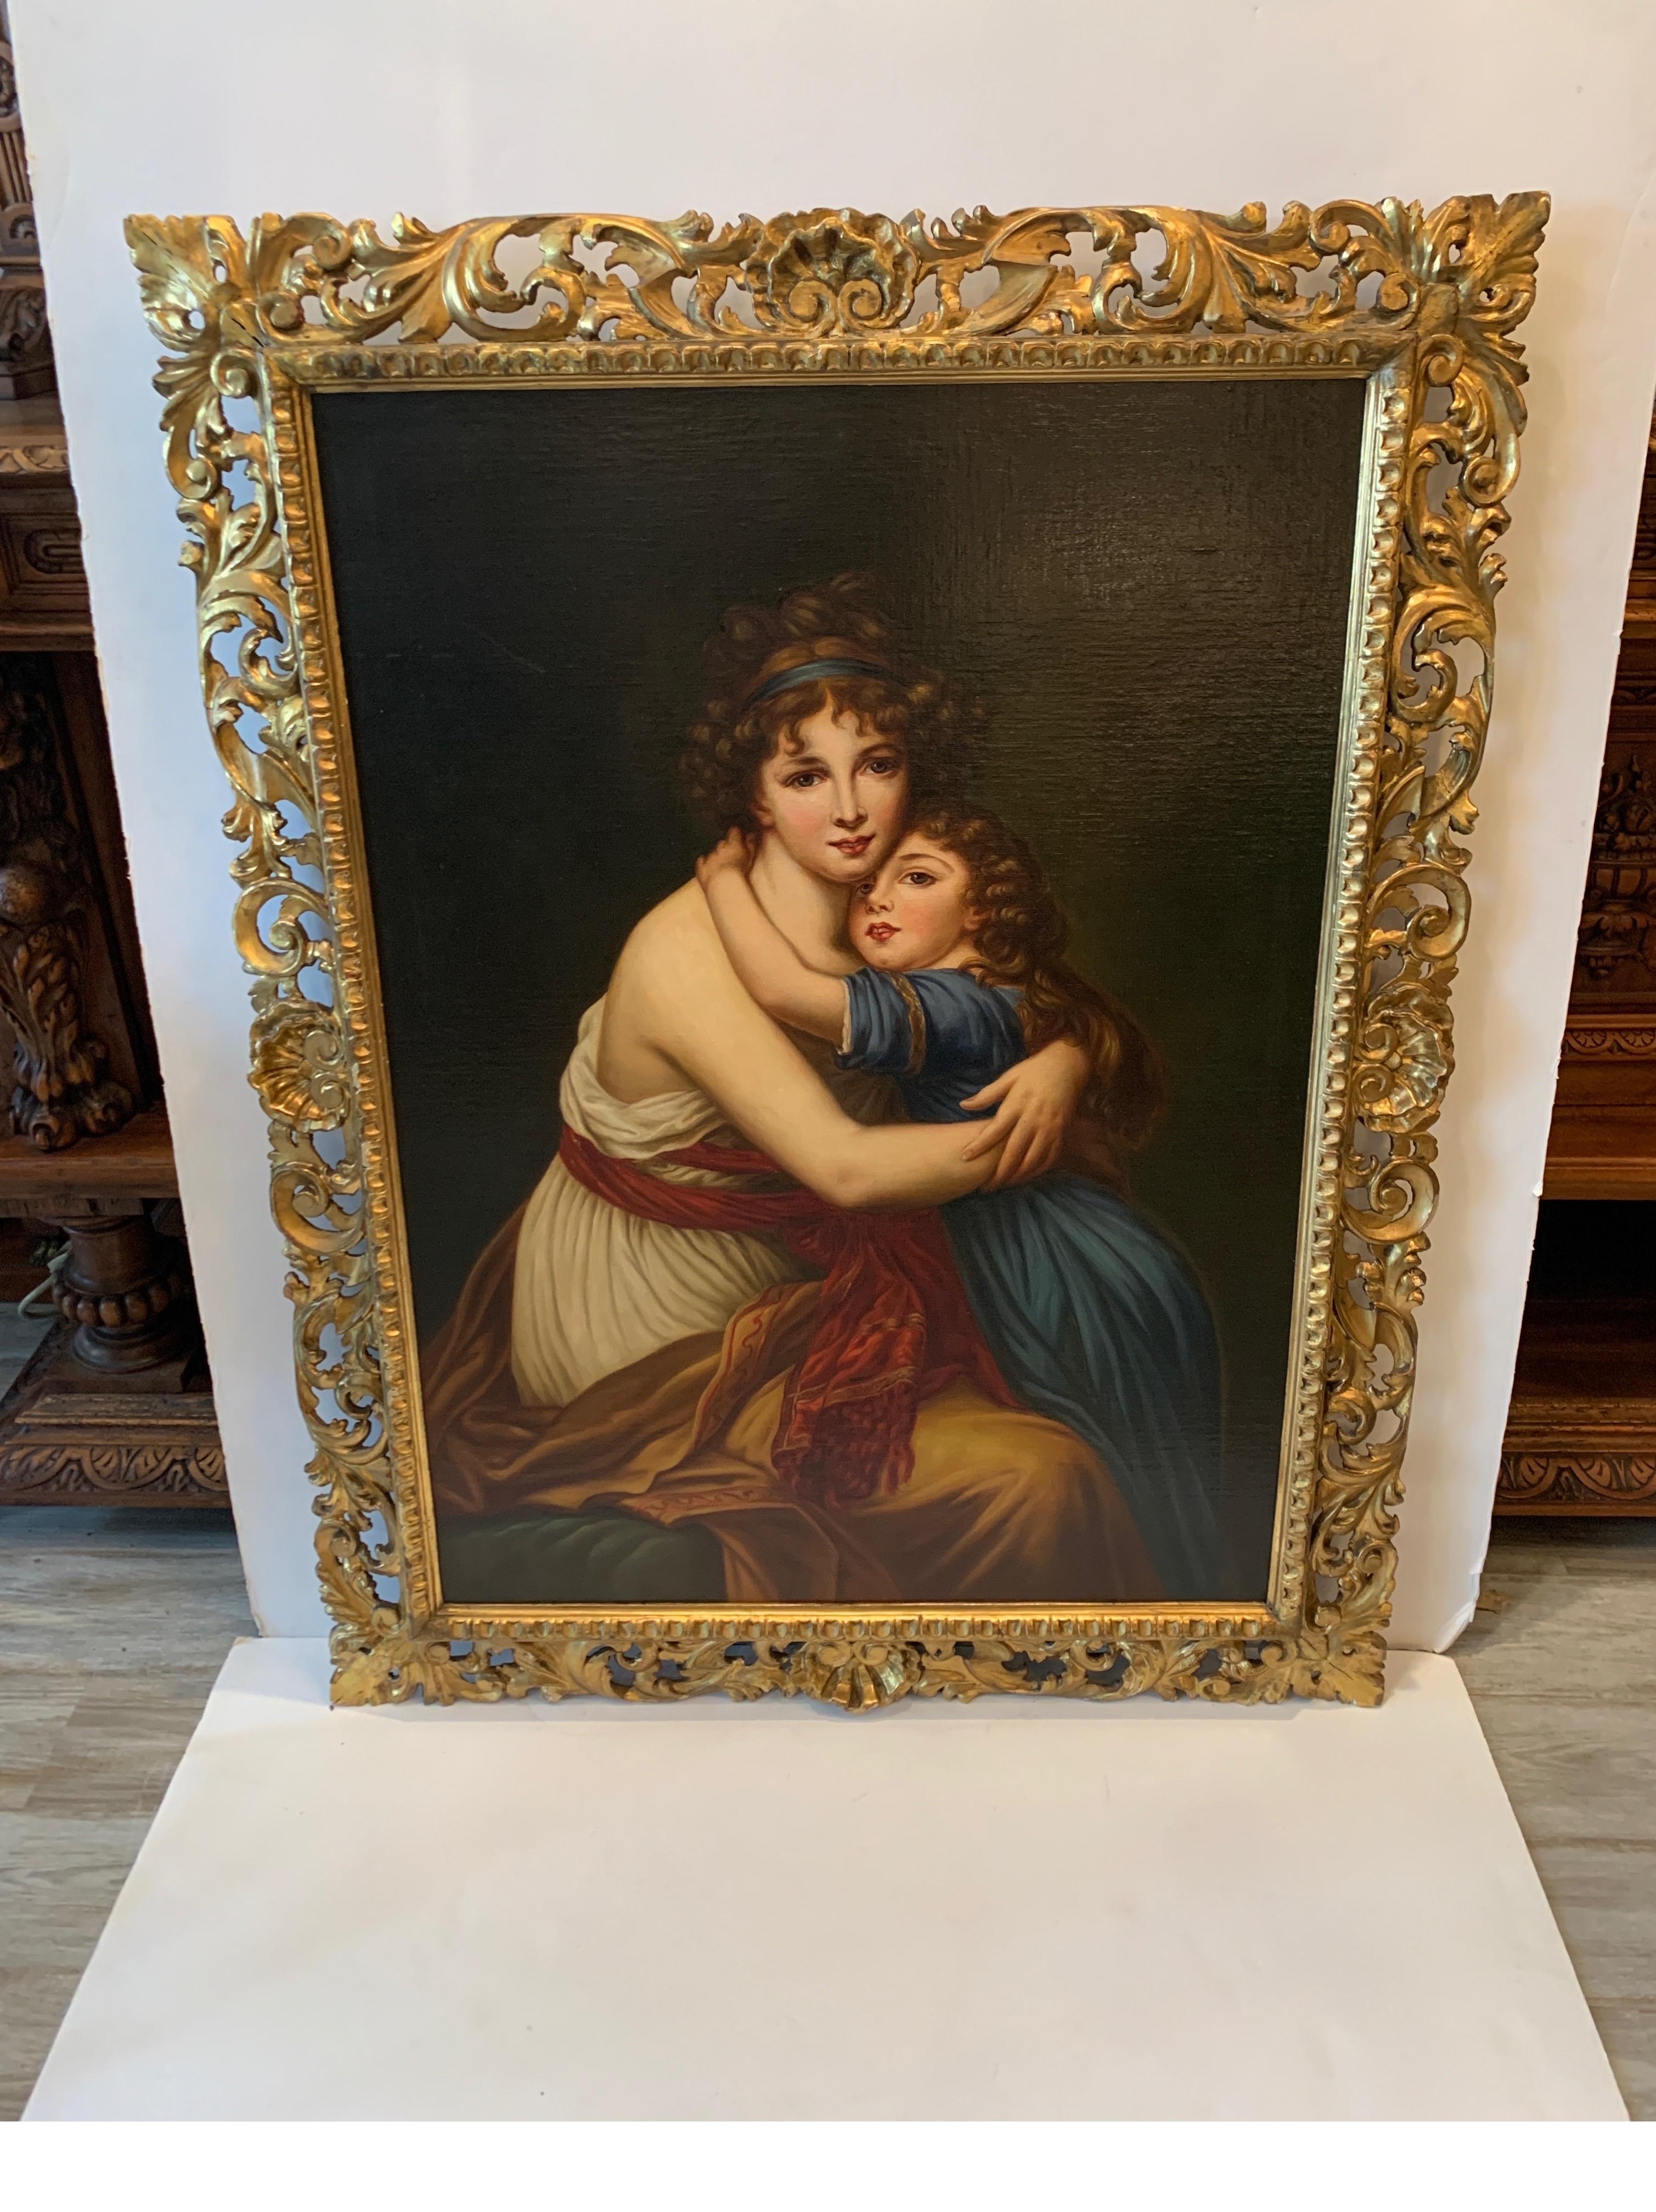 Original continental school oil on canvas of mother and daughter, circa 1890s.
In a nice wood and gilt gesso frame
Dimensions: 3